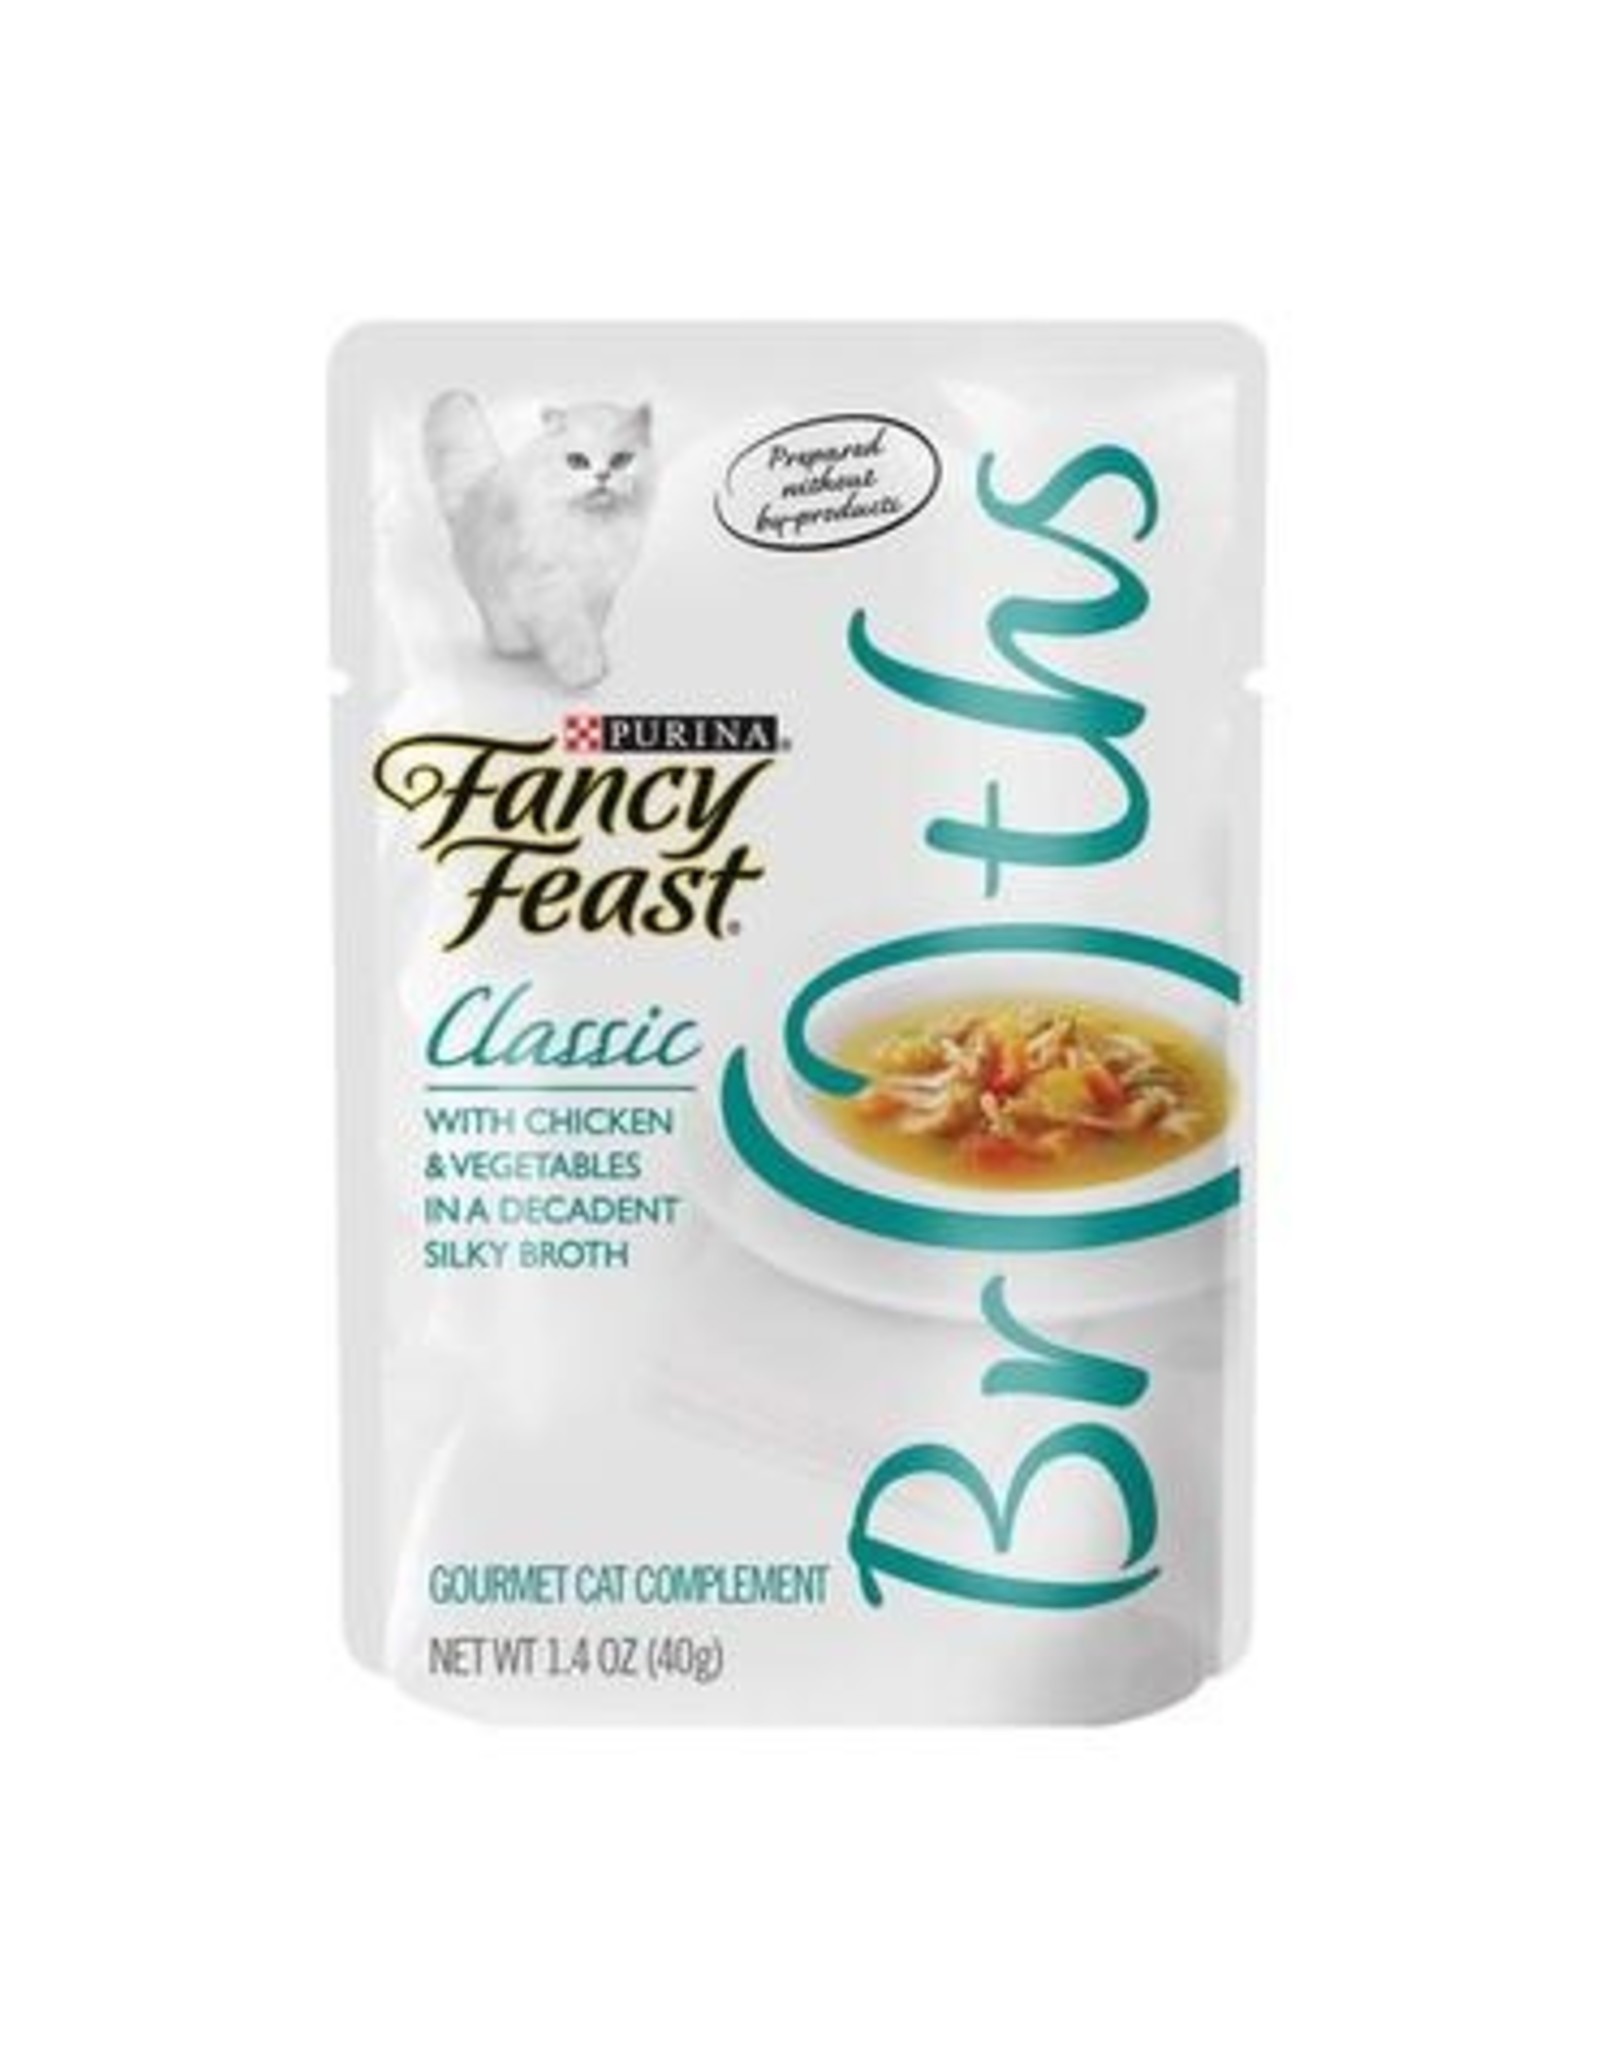 NESTLE PURINA PETCARE FANCY FEAST CLASSIC BROTHS CHICKEN & VEGETABLES 1.4OZ CASE OF 16